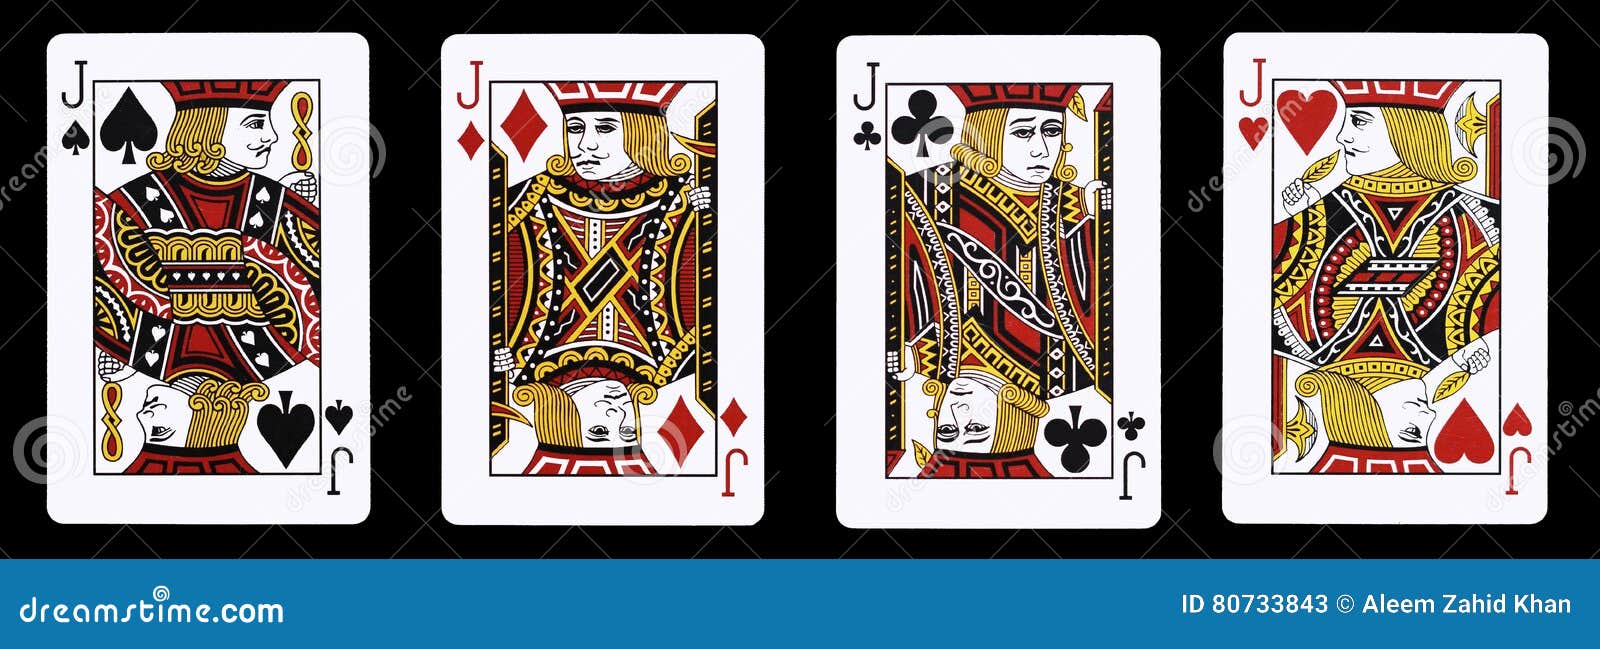 4 jack in a row - playing cards